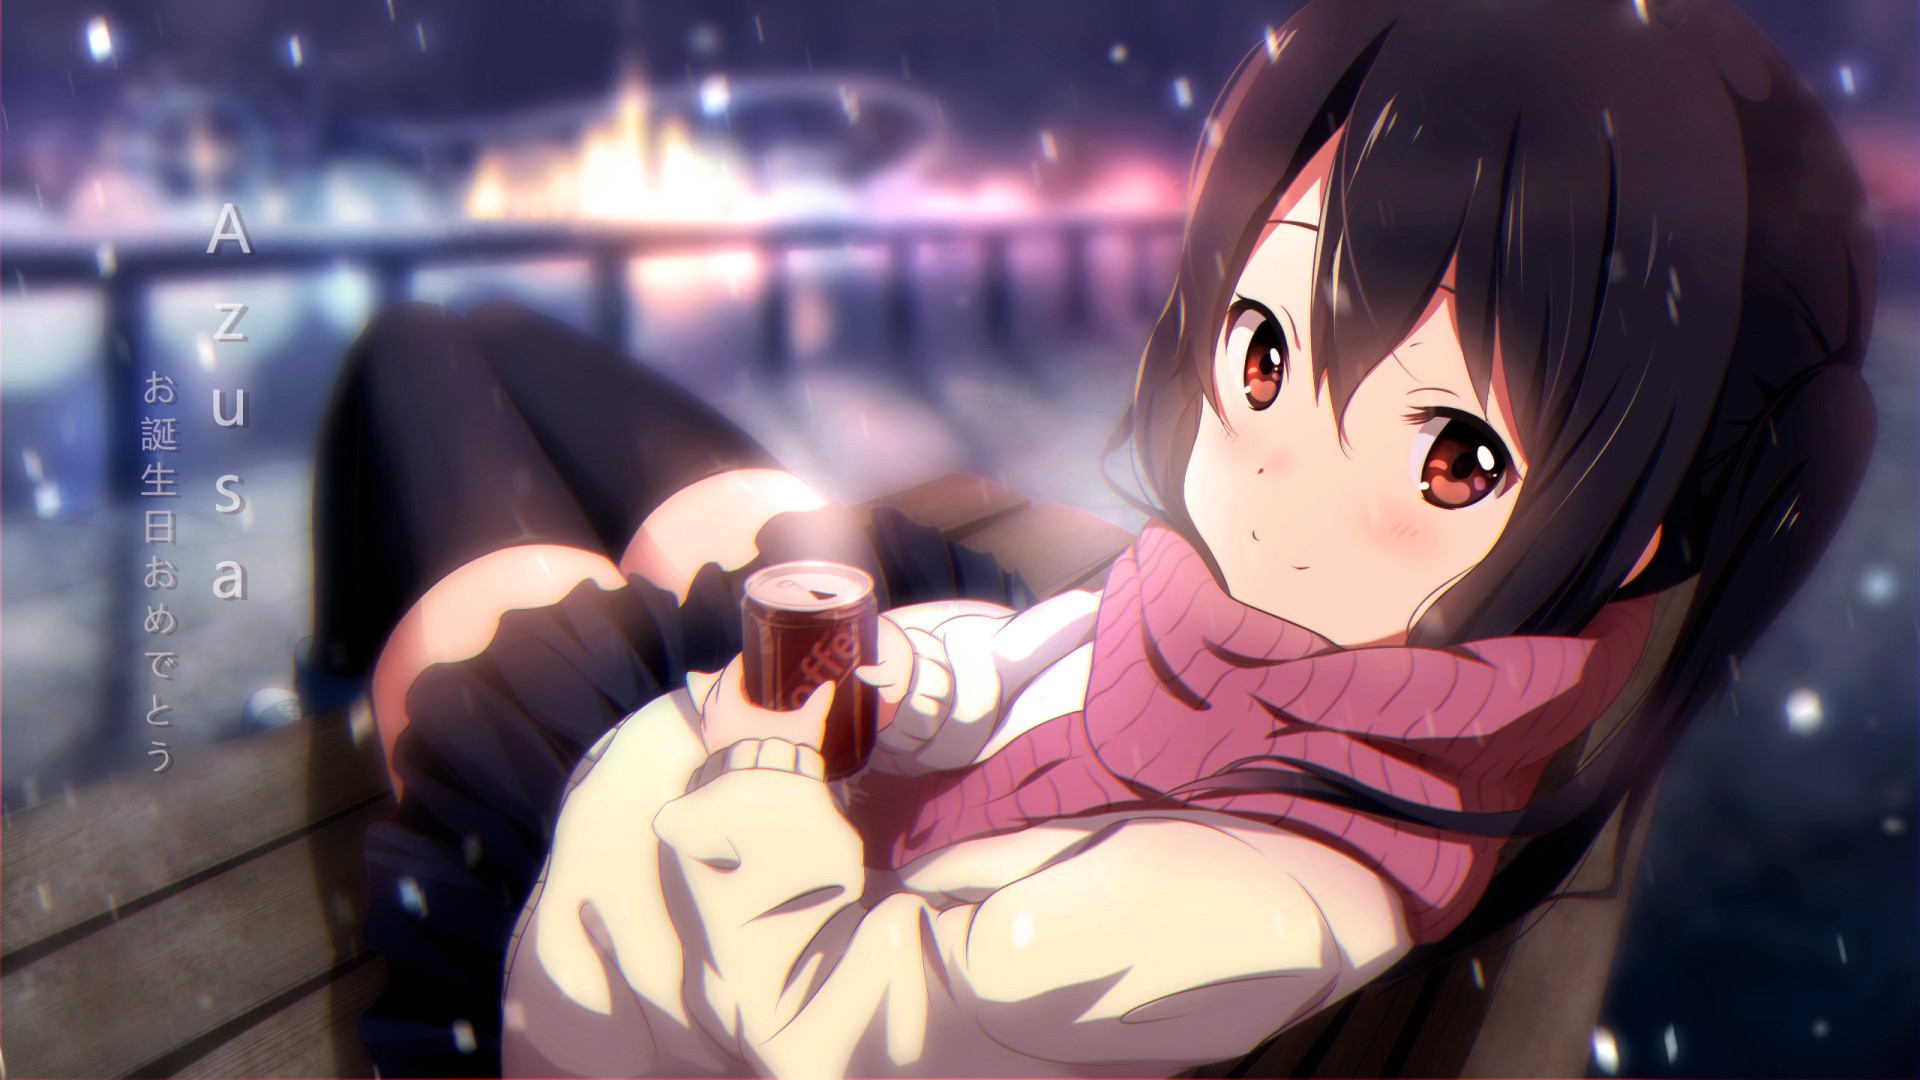 Anime 1920x1080 anime girls K-ON! anime Pixiv can coffee red eyes stockings black stockings thighs together looking at viewer urban women outdoors dark hair Nakano Azusa